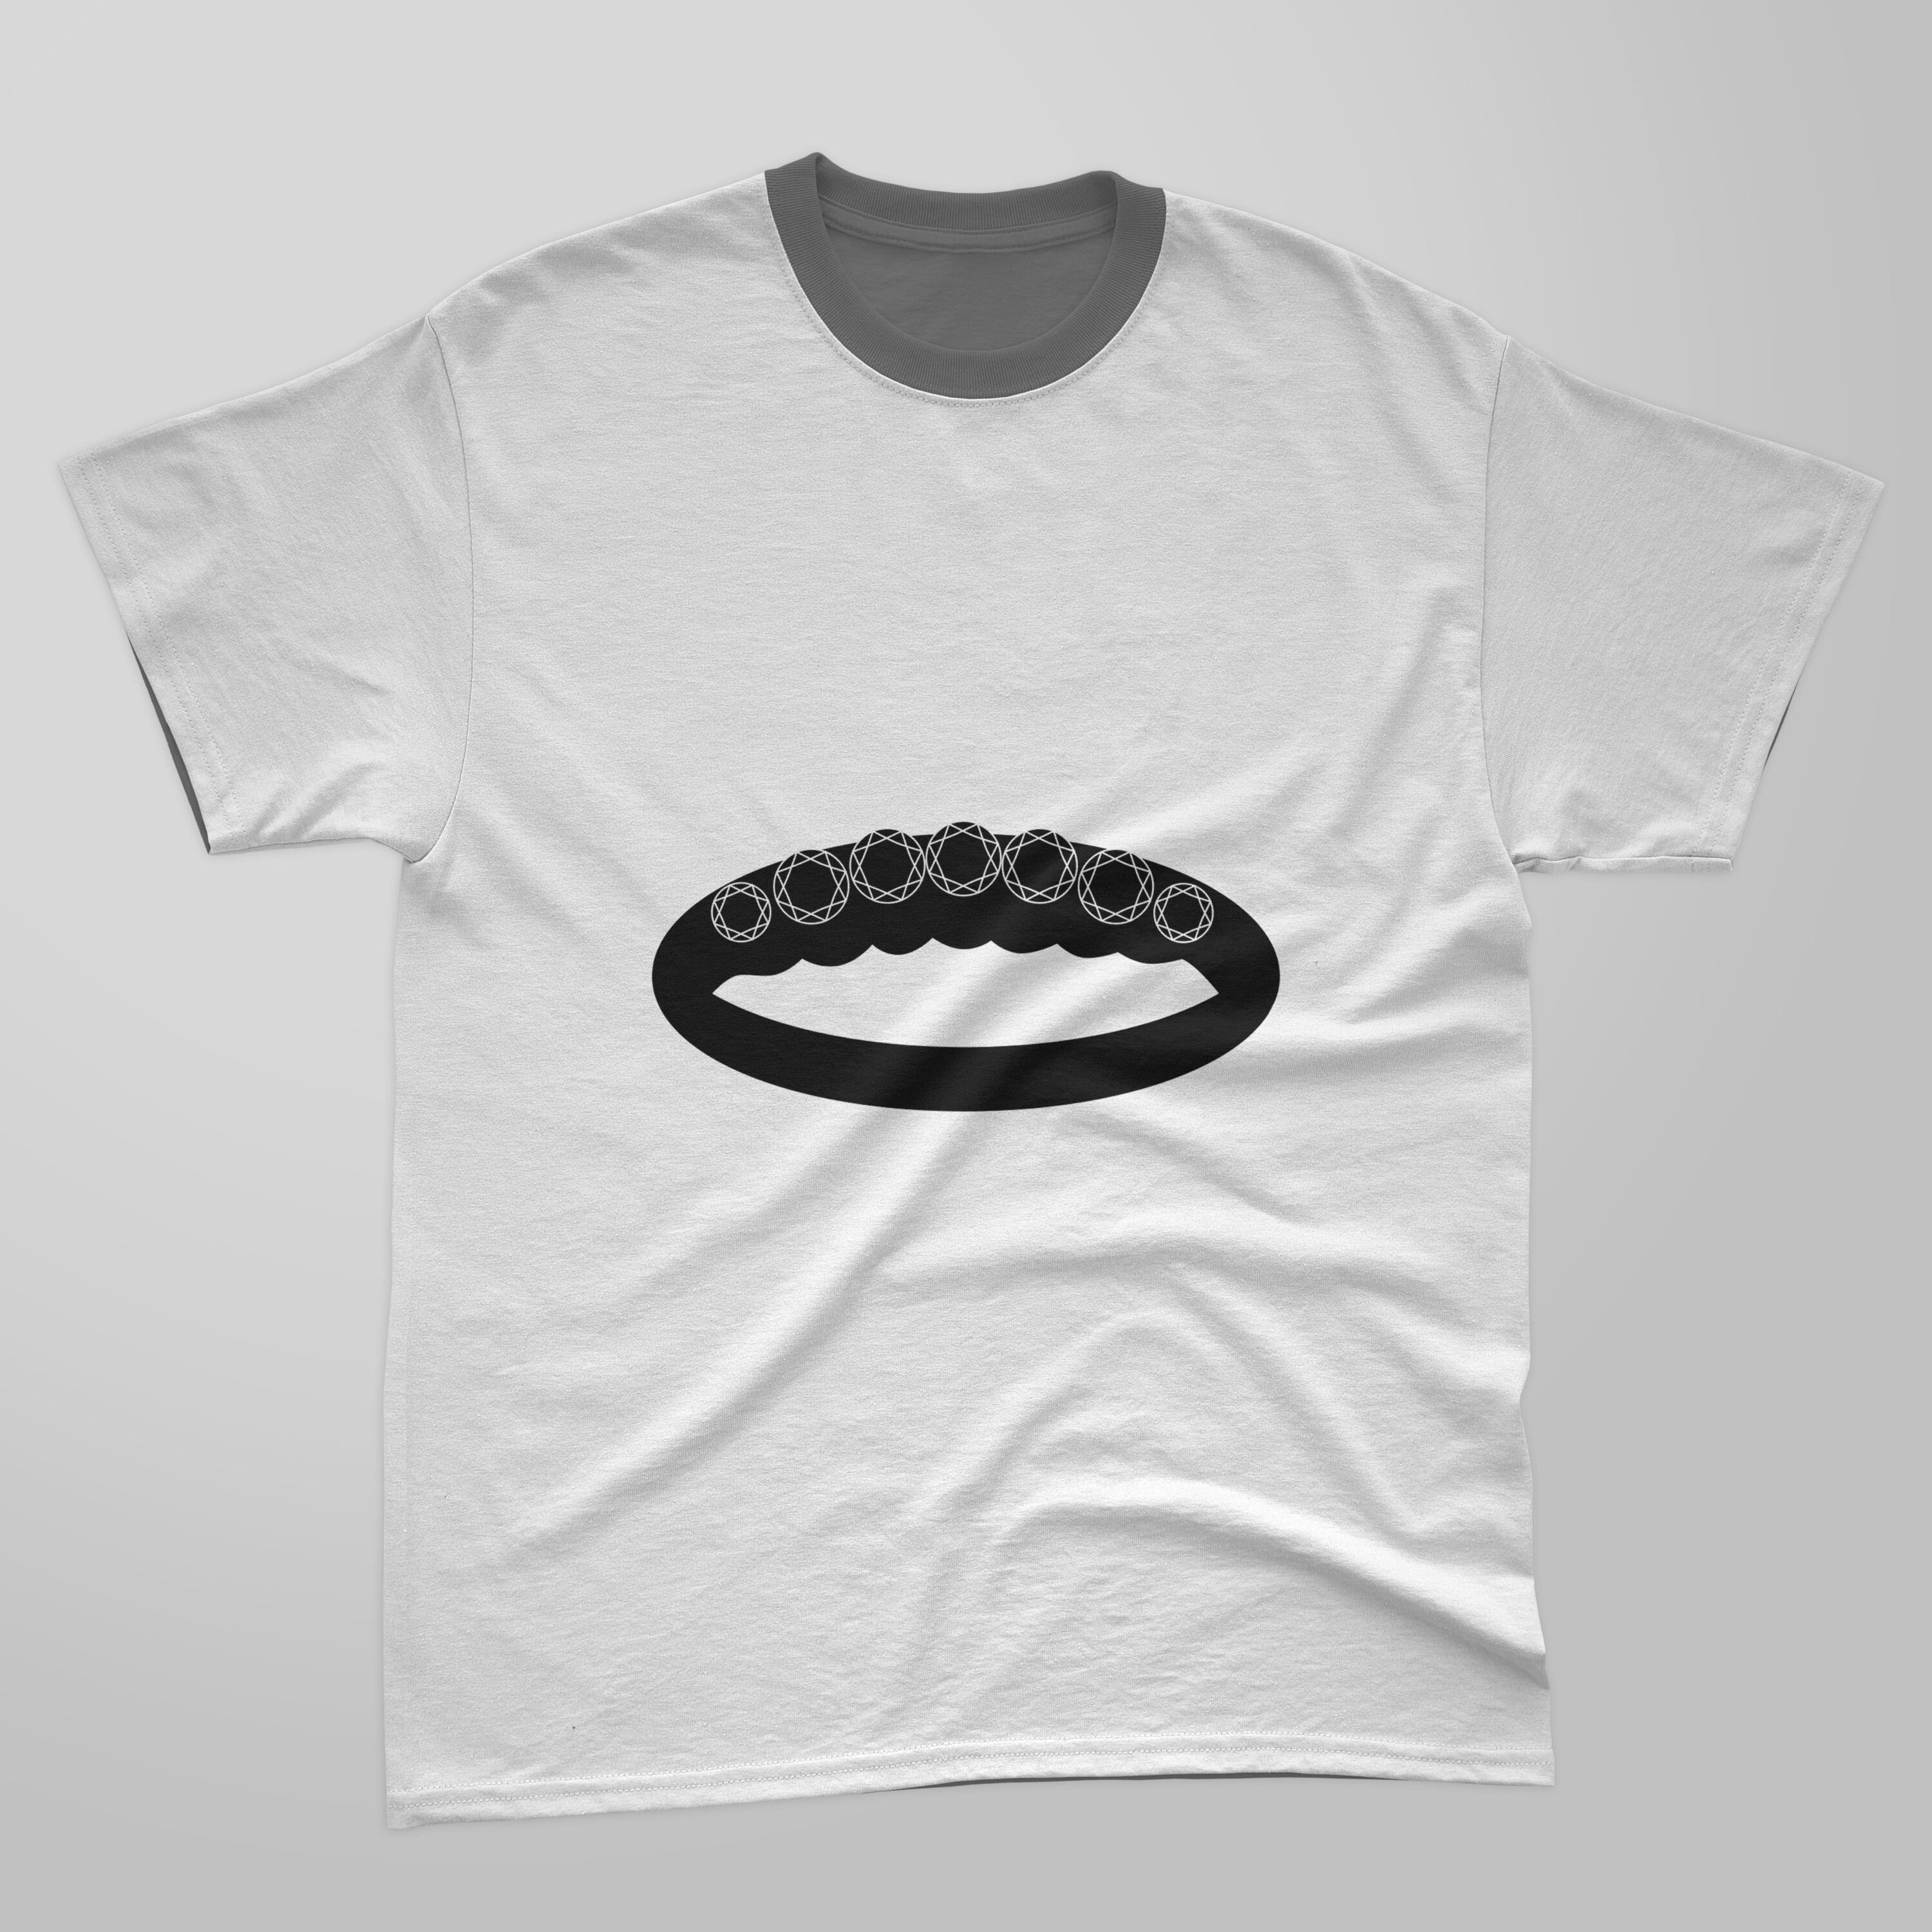 Image of t-shirt with beautiful print of diamond ring silhouette.